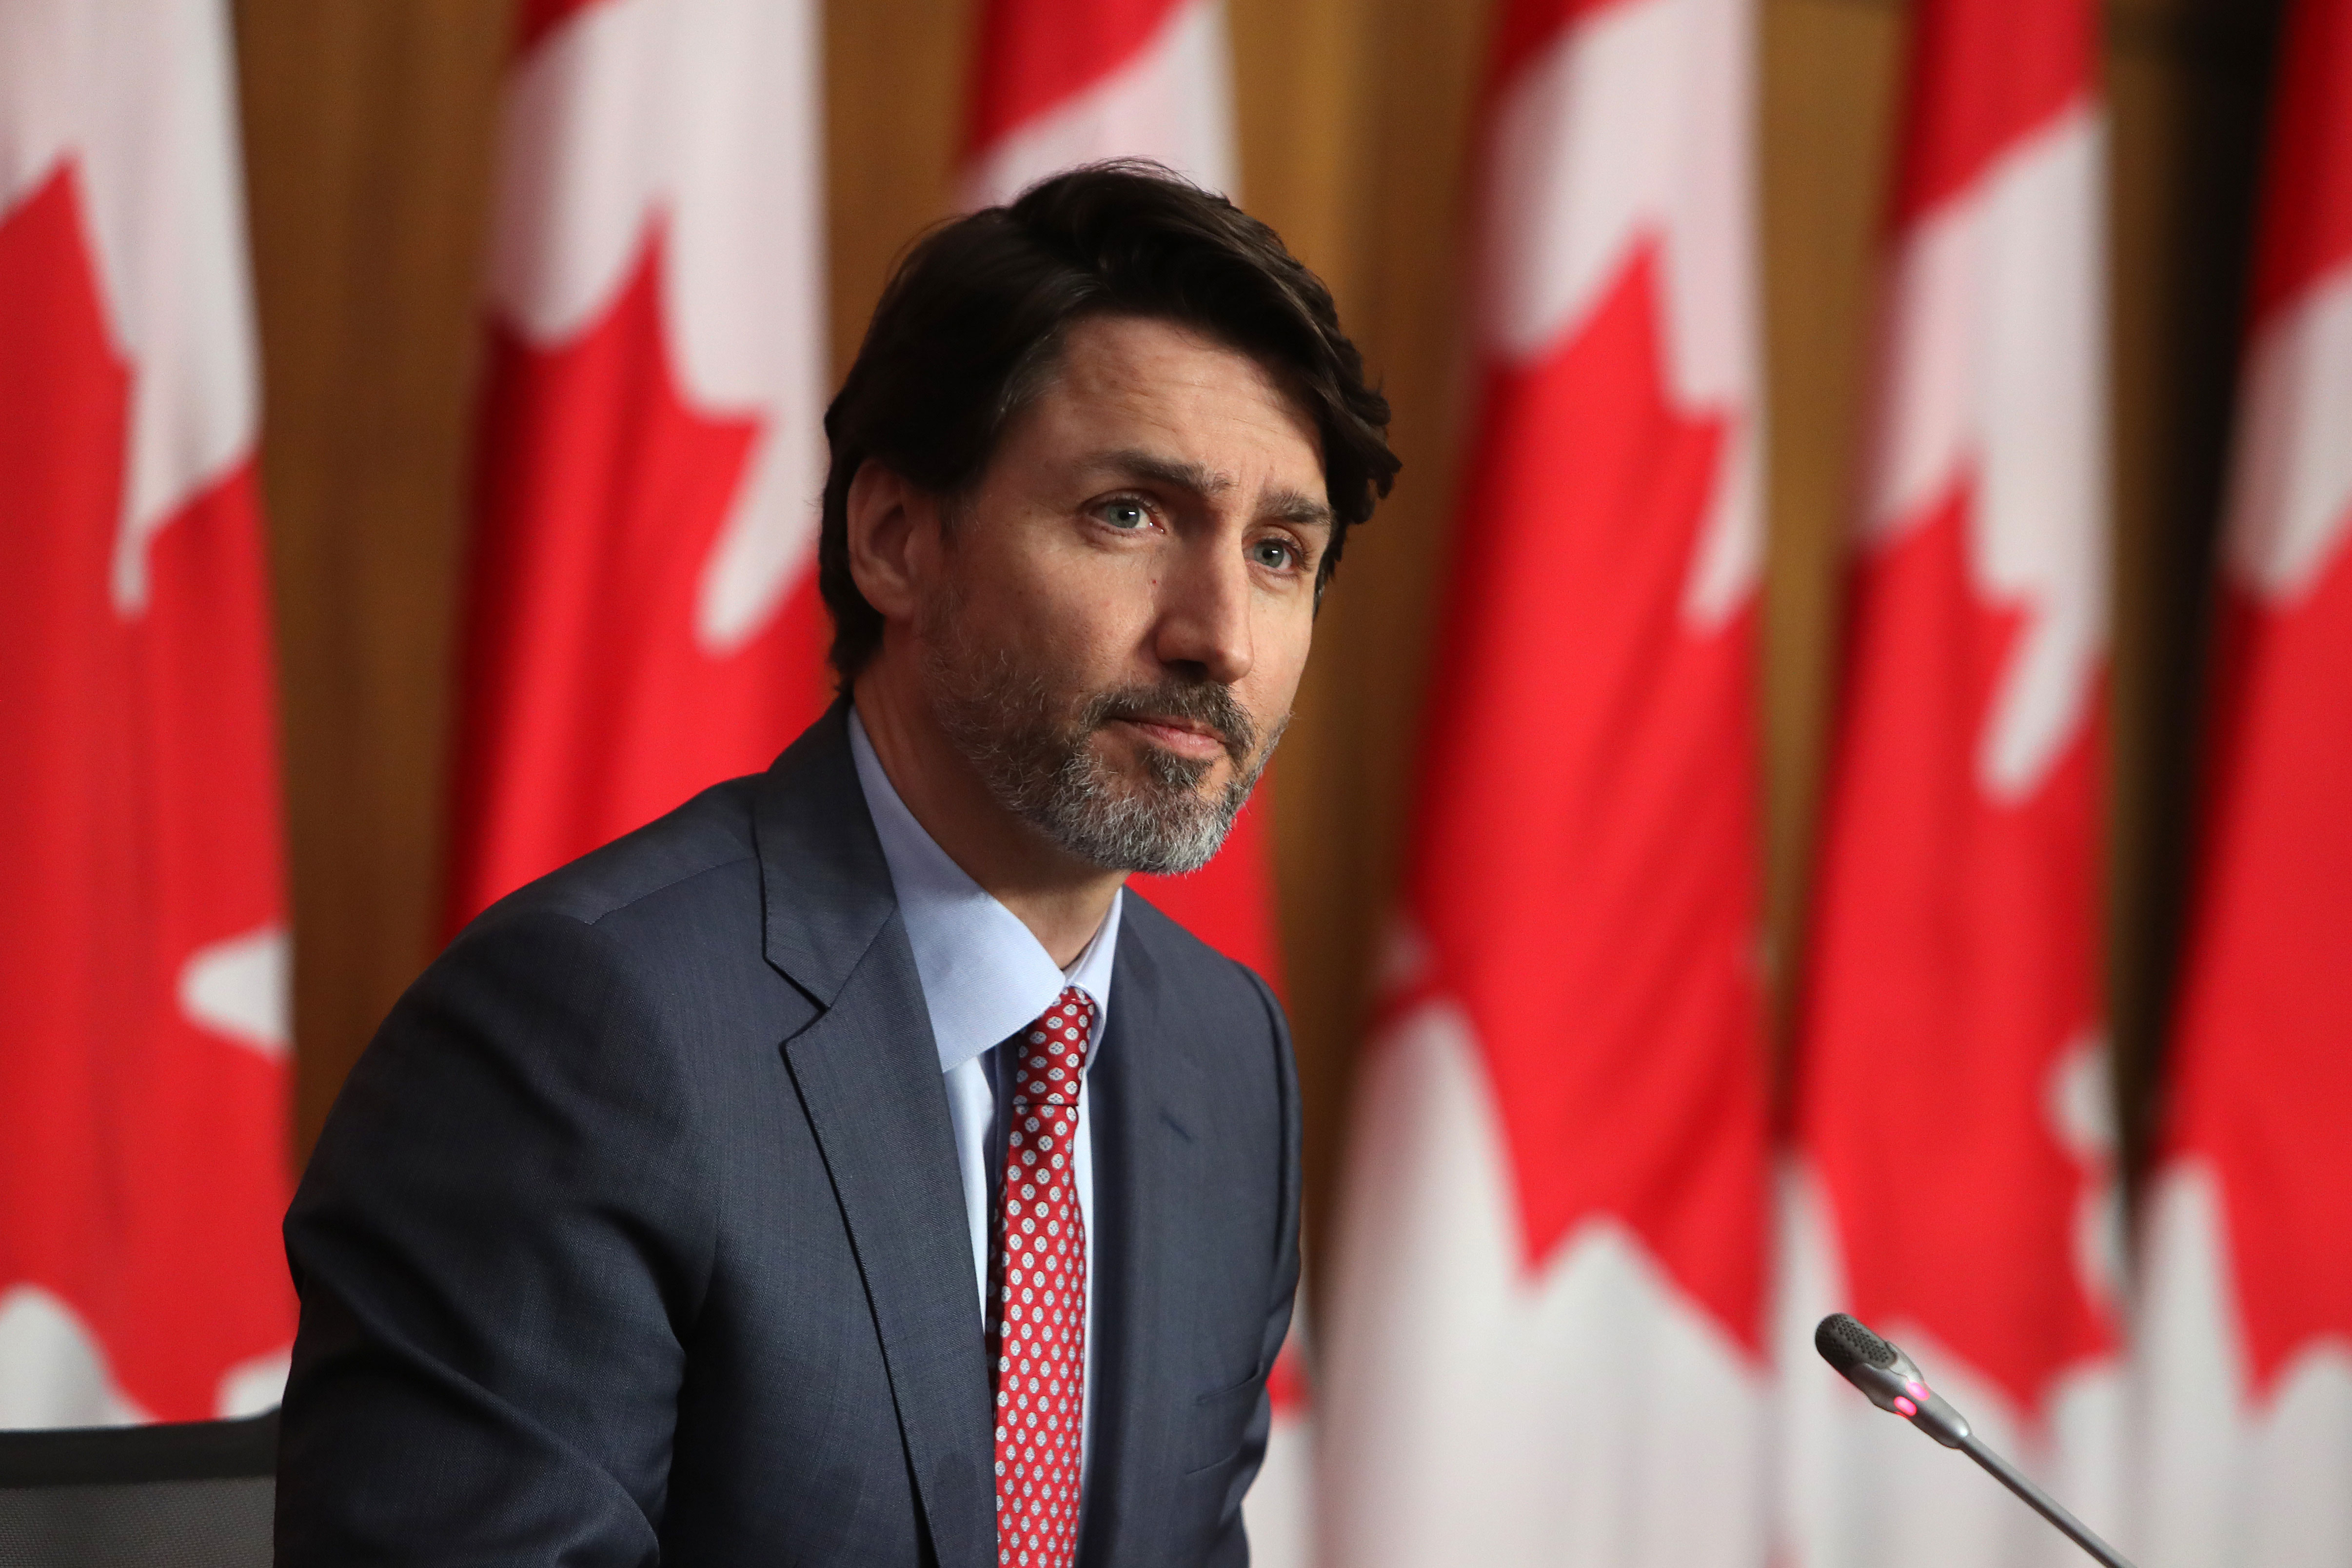 Canadian Prime Minister Justin Trudeau listens during a news conference in Ottawa on March 19, 2021.